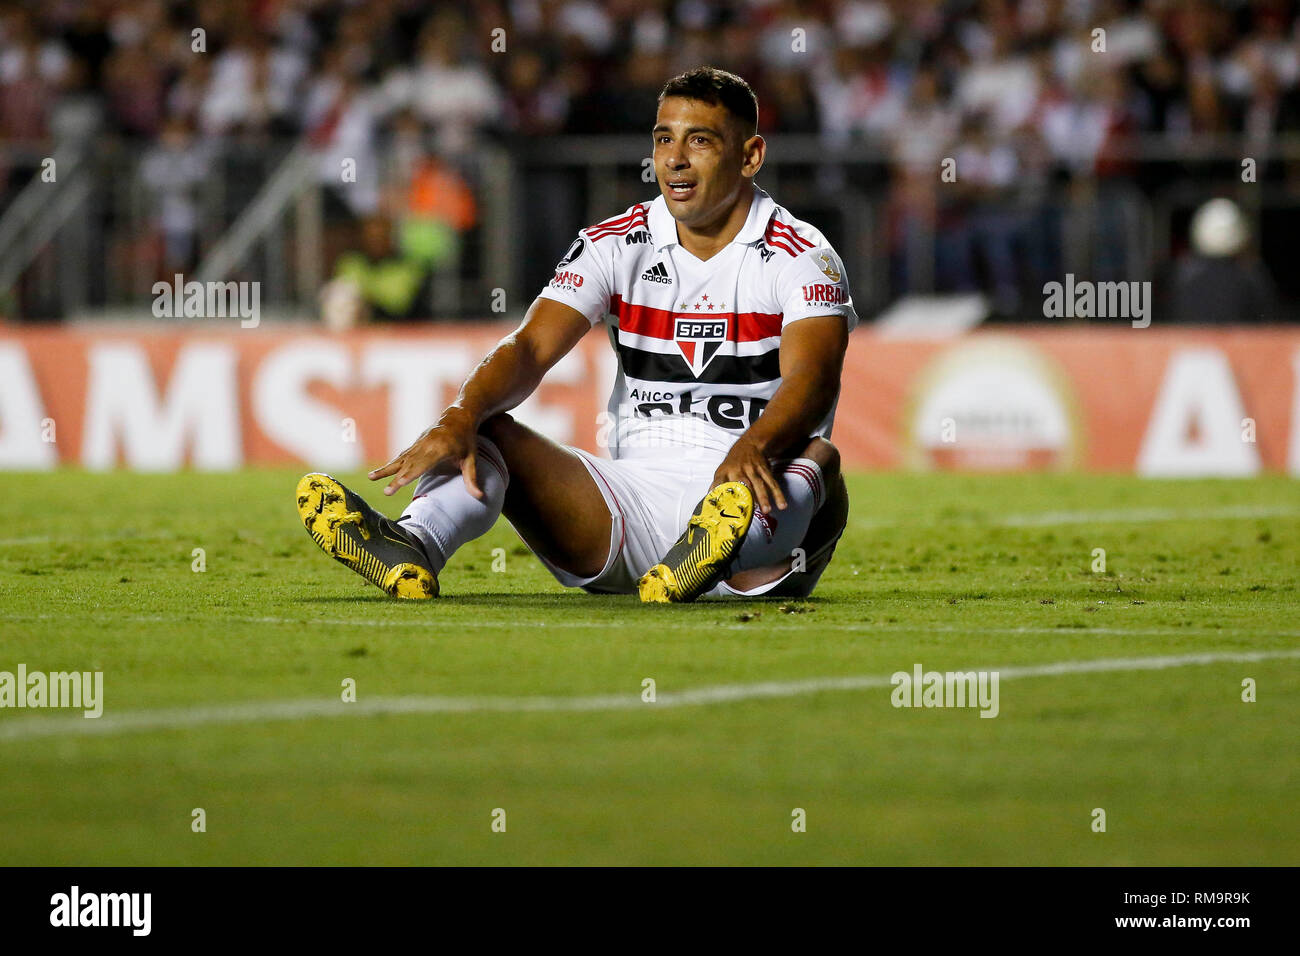 São Paulo, Brazil. 13th Feb 2019. Diego Souza regrets the goal lost during the match between São Paulo FC and Talleres (Argentina), valid for the second phase of the Copa Libertadores 2019, held at the Estádio do Morumbi, in São Paulo. (Photo: Marco Galvão/Fotoarena) Credit: Foto Arena LTDA/Alamy Live News Stock Photo